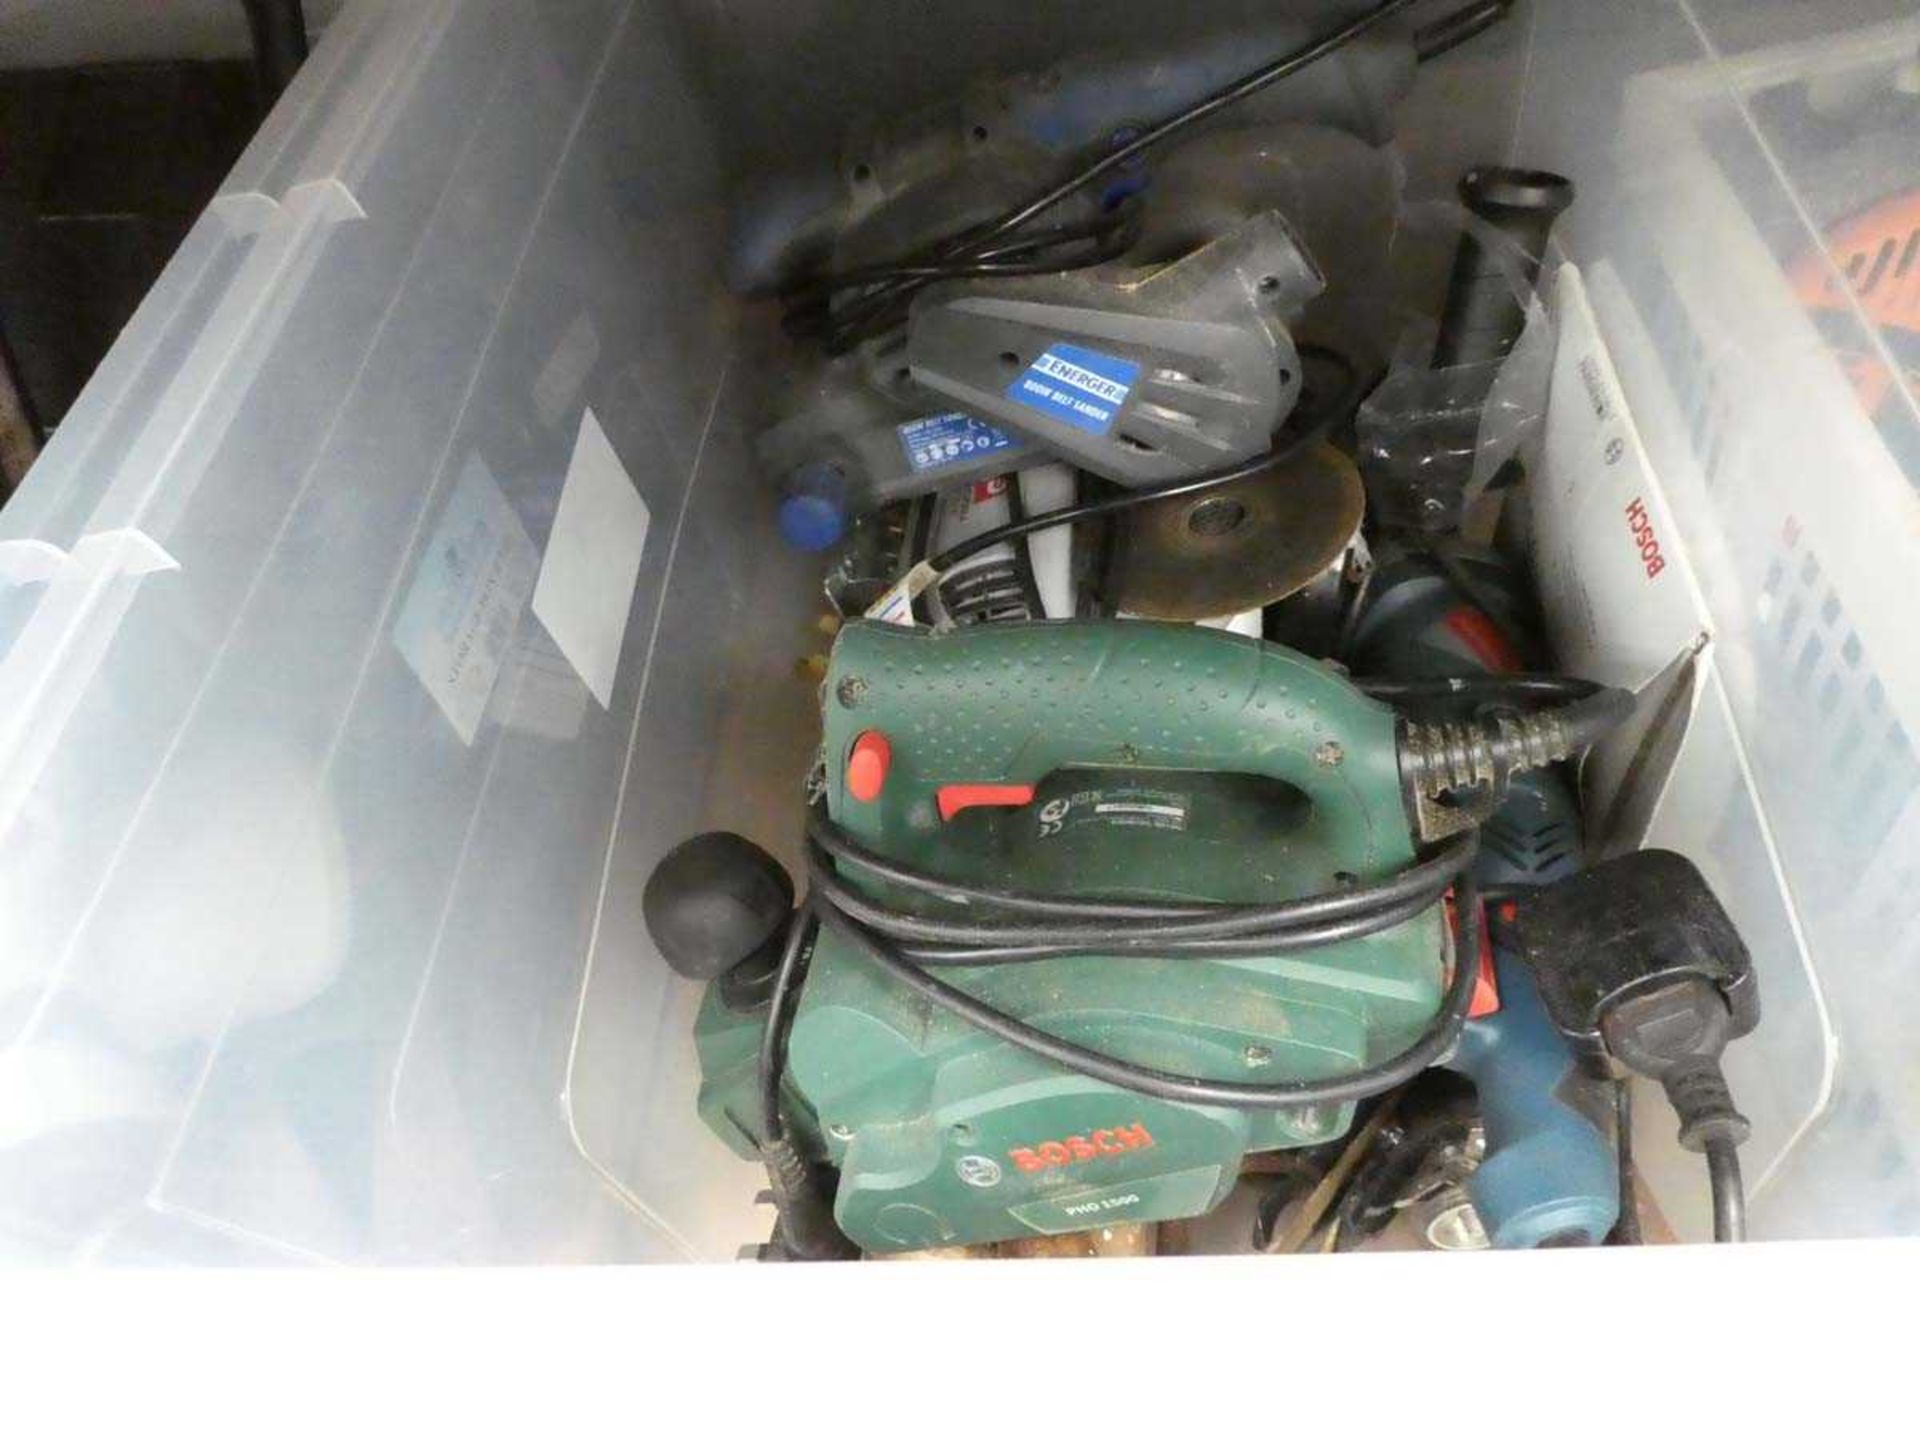 Underbay containing power tools, spanners, saws, toolbelts etc - Image 4 of 5